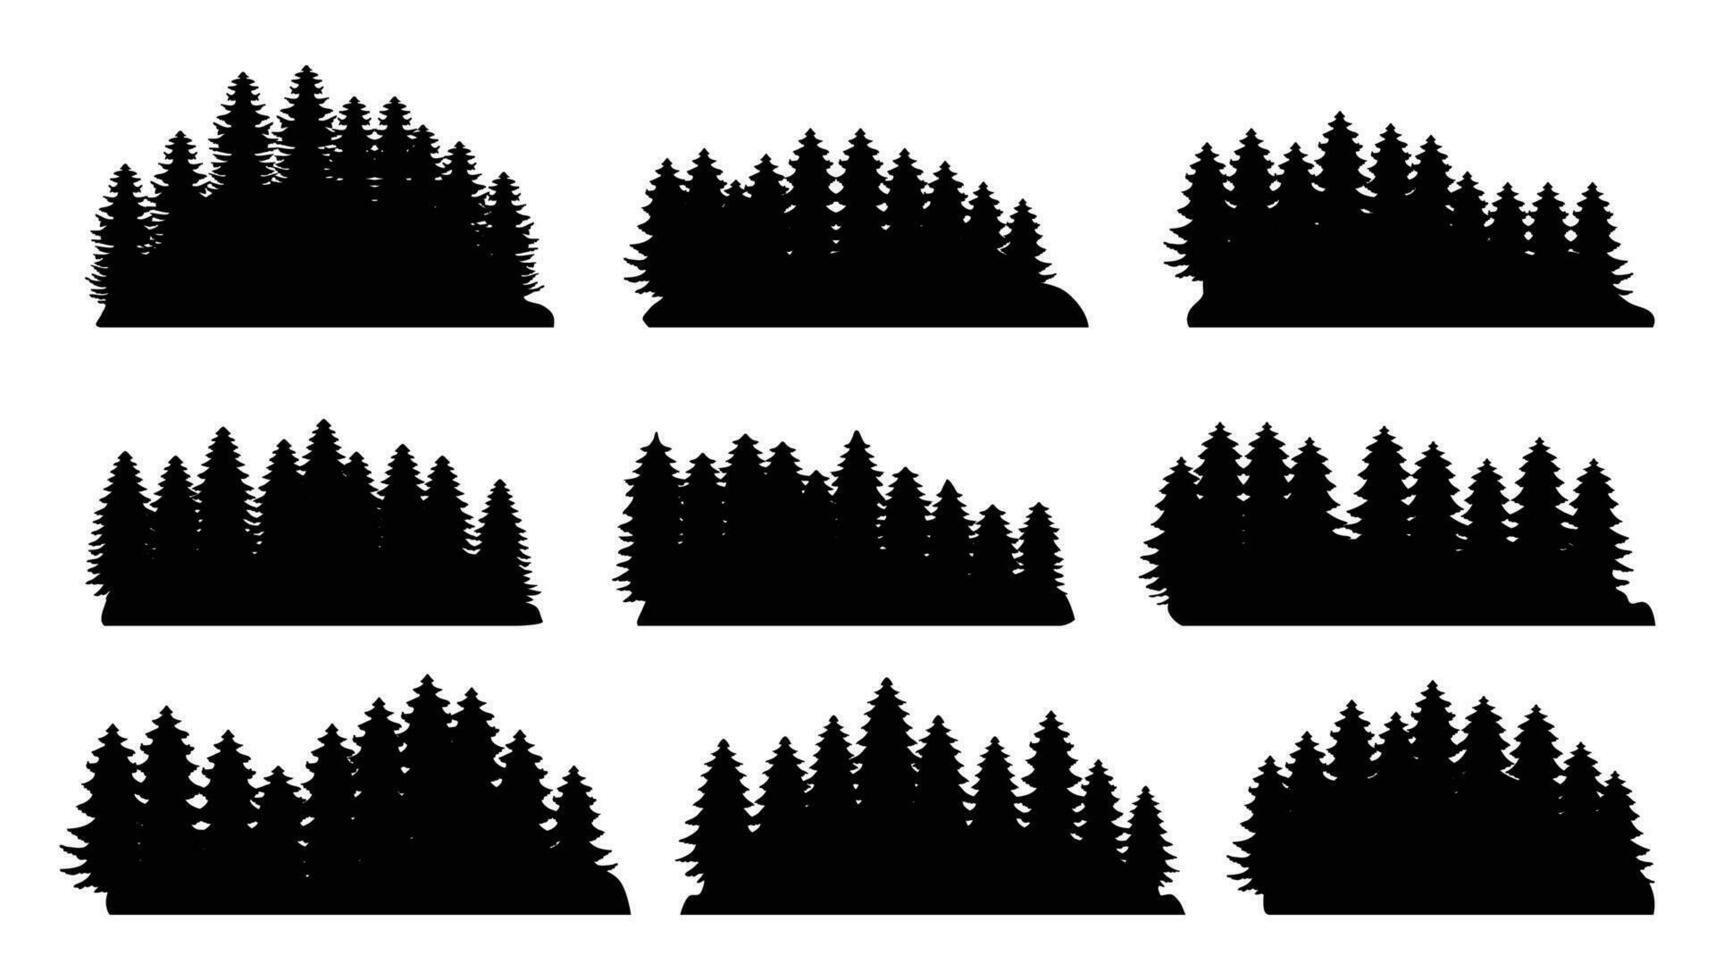 Silhouettes of pine trees lined up. Vector illustrations